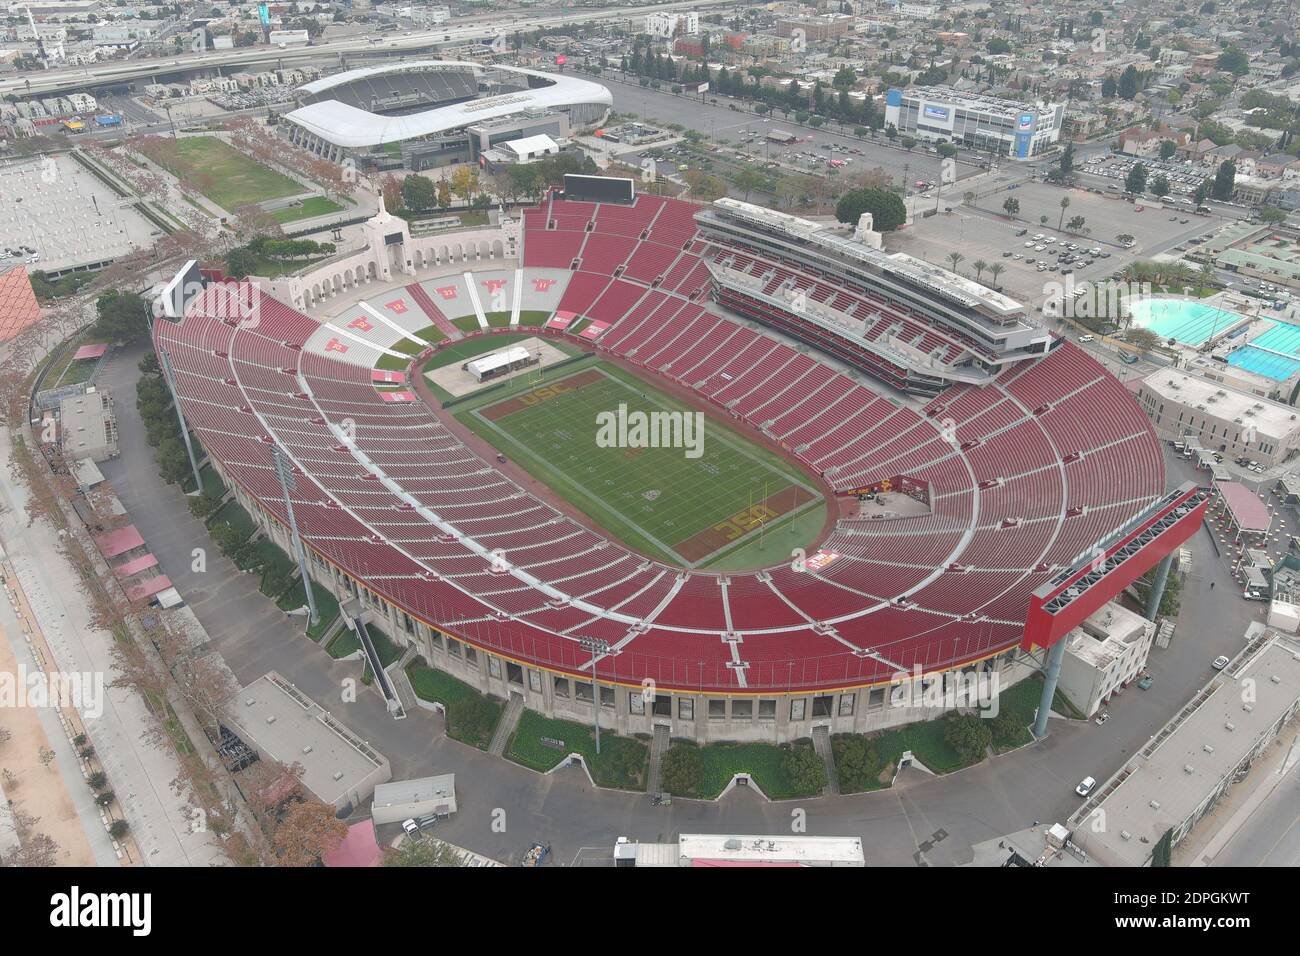 A general view of the Los Angeles Memorial Coliseum and Banc of California Stadium, Monday, Dec. 7, 2020, in Los Angeles. Stock Photo